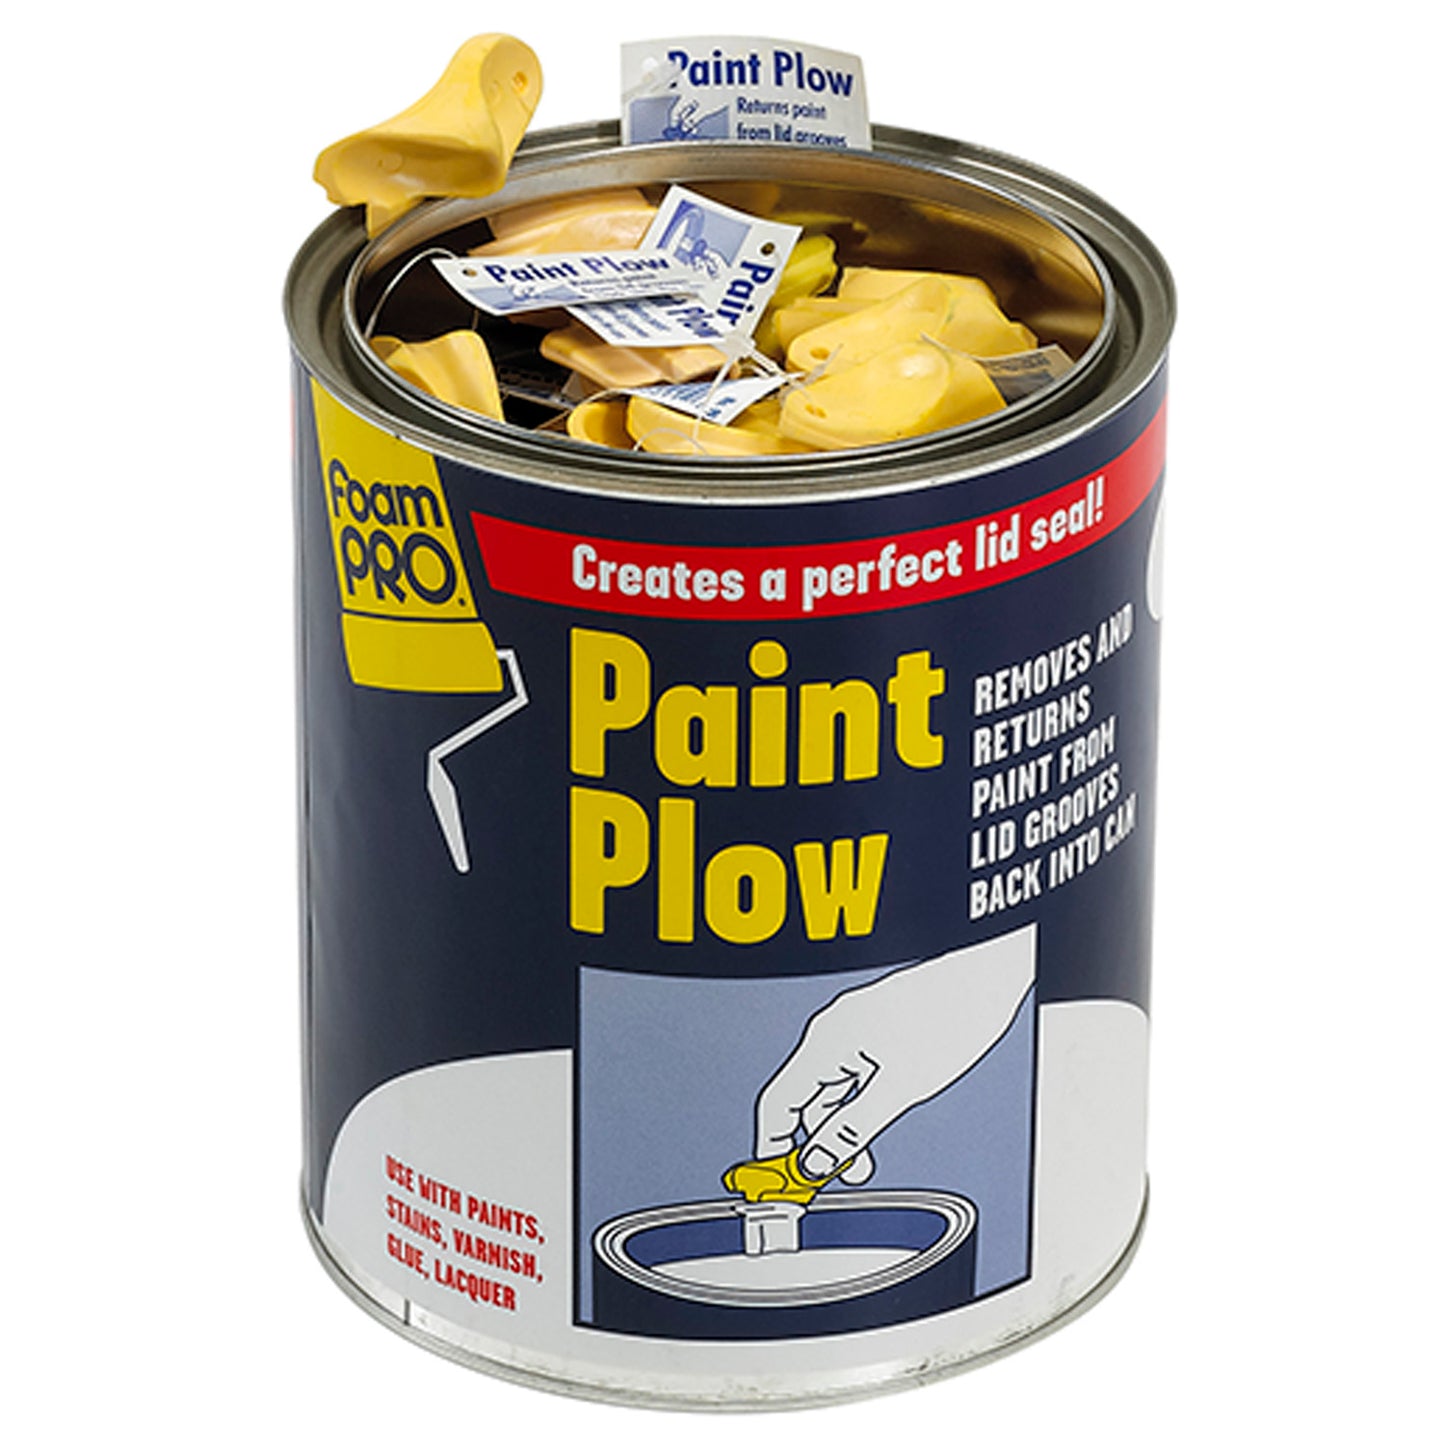 Paint Plow (100 per 1-Gallon Can)